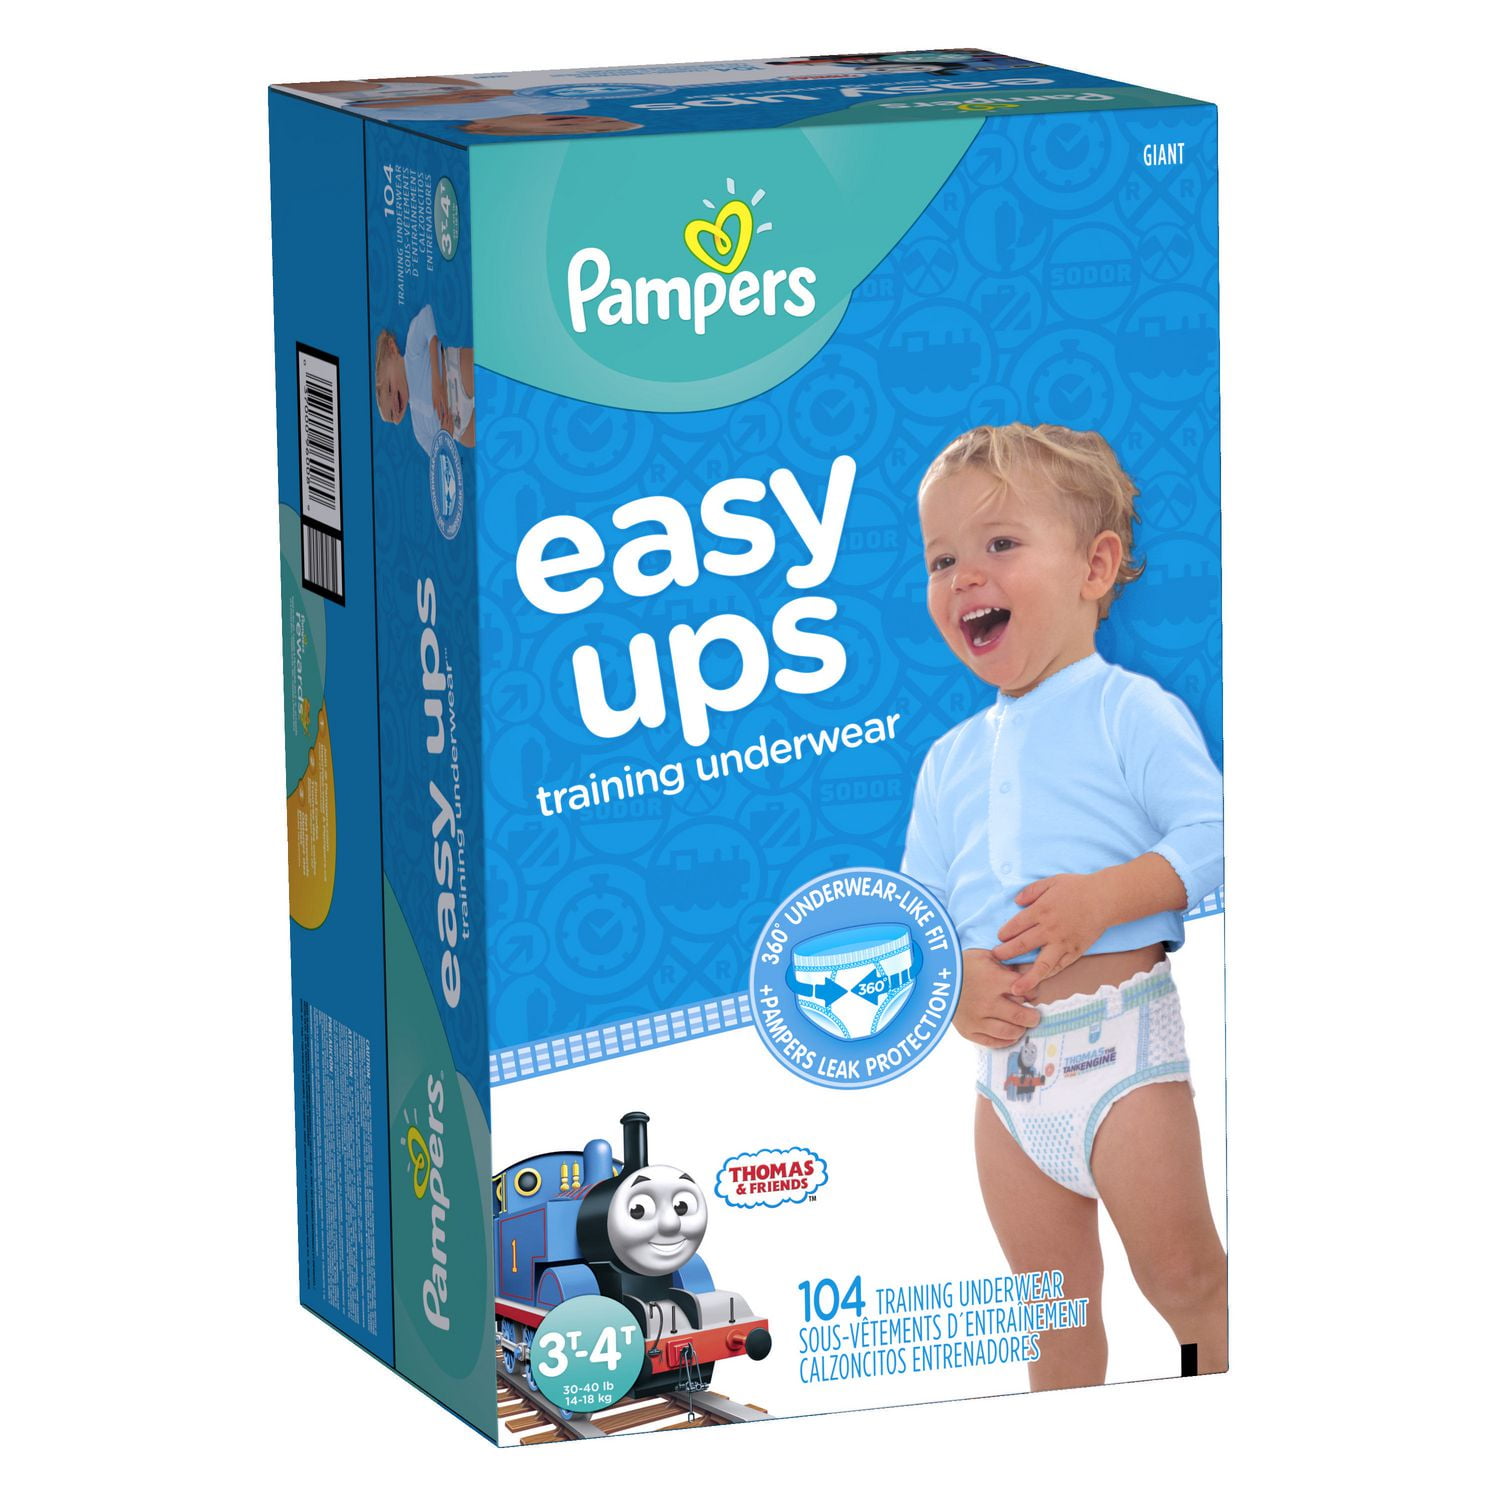 Pampers Easy Ups Thomas & Friends™ Training Underwear Size 4T–5T 19 ct Pack, Diapers & Training Pants